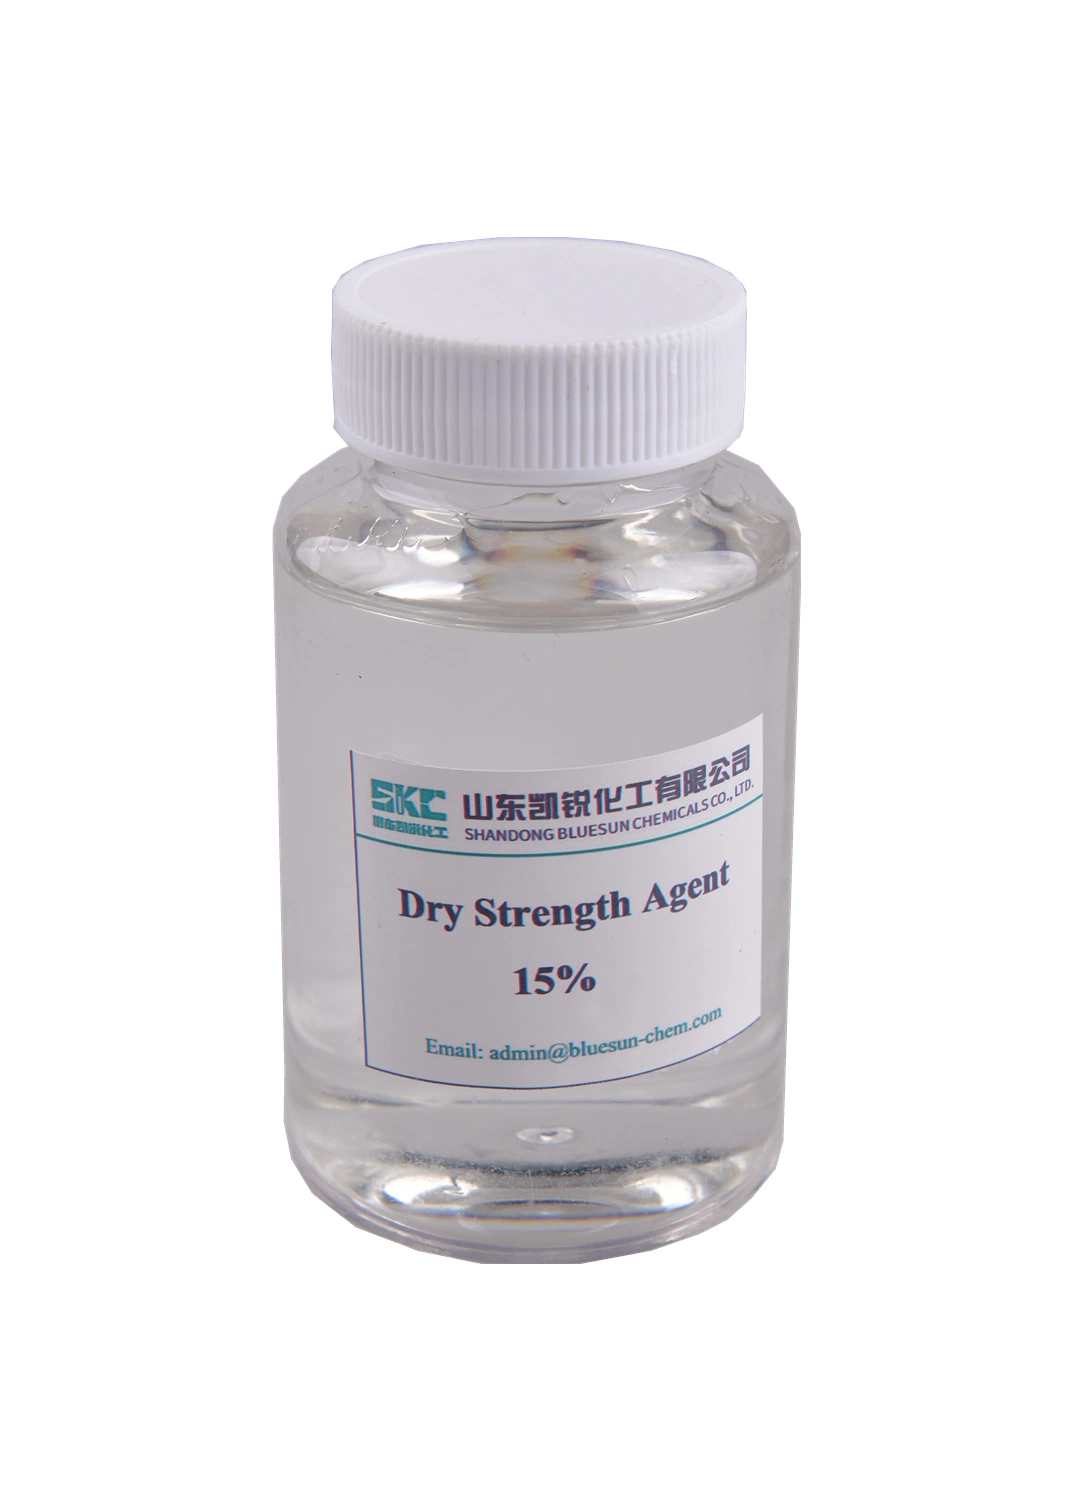 Dry Strength Agent Dsr 15%-20% / Colorless Viscous Liquid